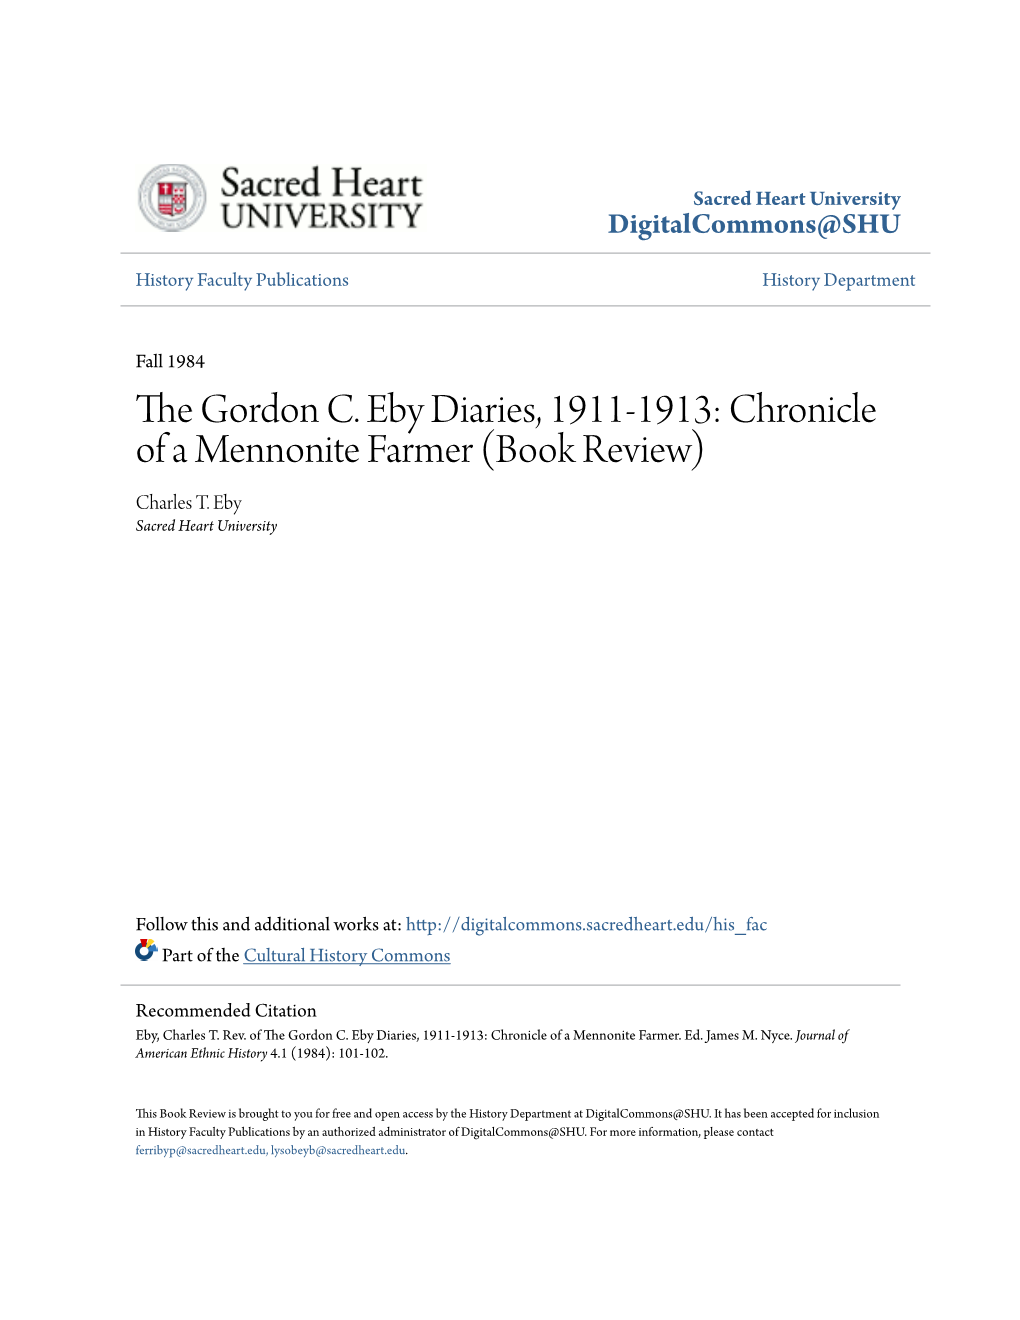 The Gordon C. Eby Diaries, 1911-1913: Chronicle of a Mennonite Farmer (Book Review) Charles T